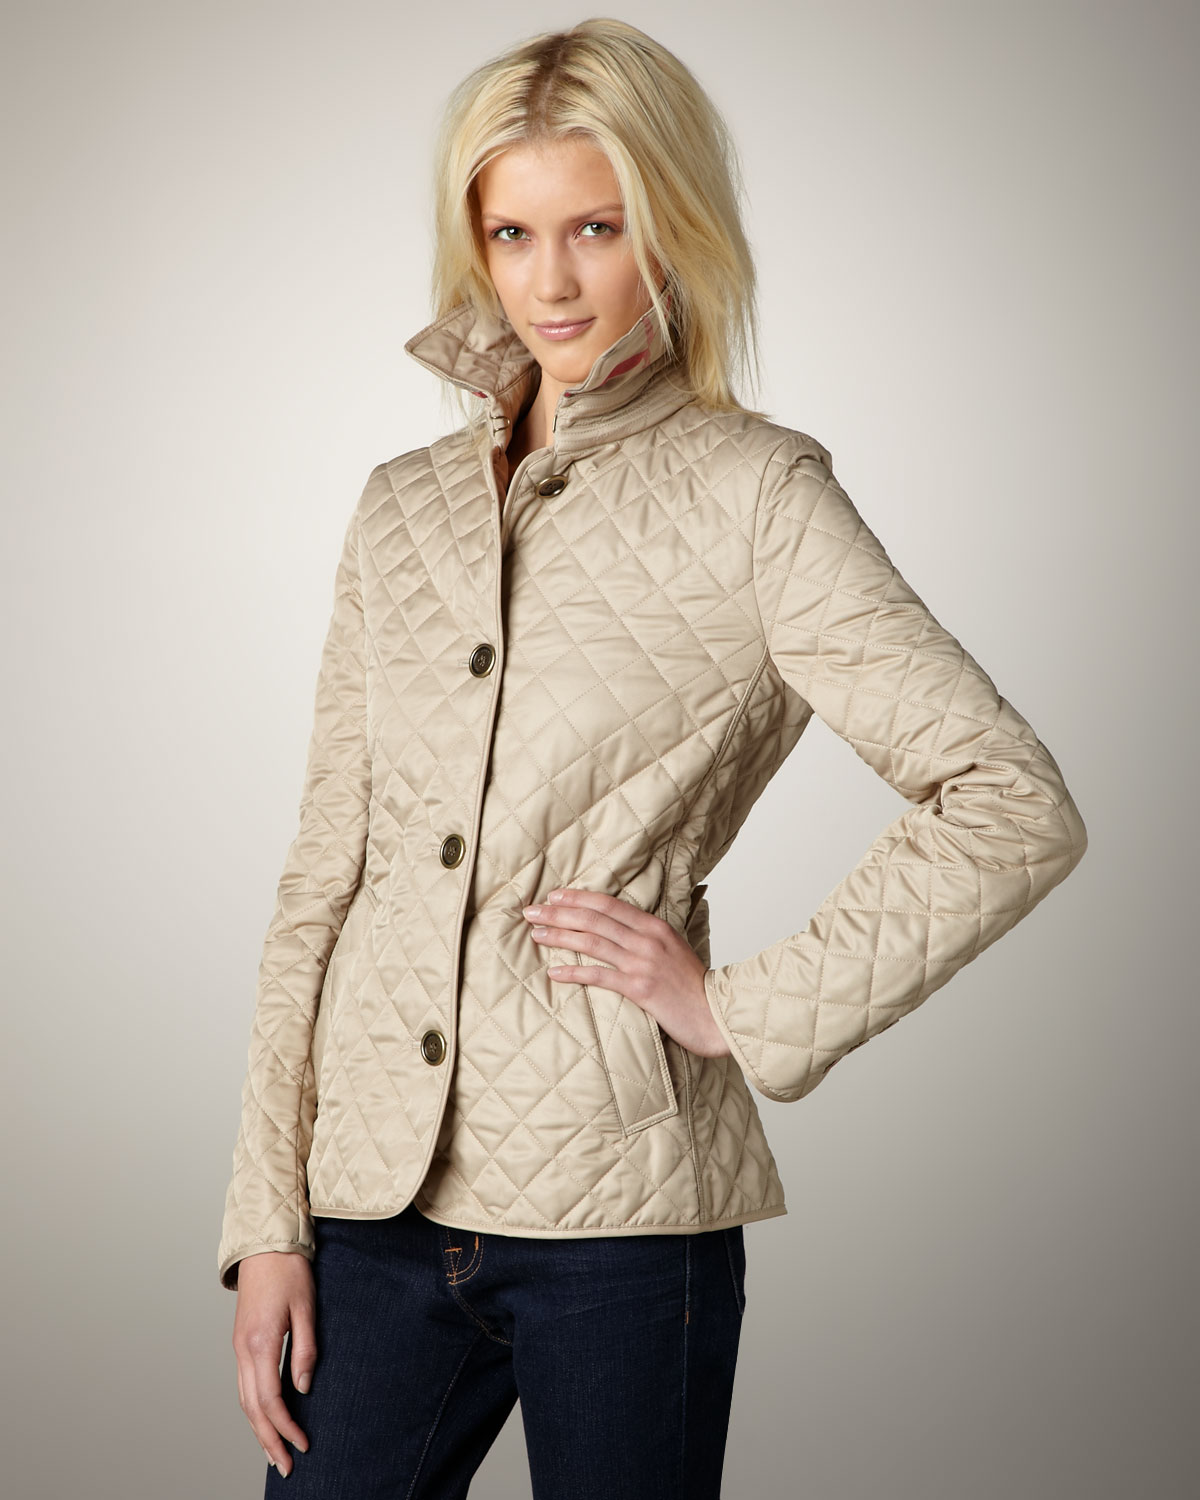 Lyst - Burberry Brit Quilted Jacket in Natural